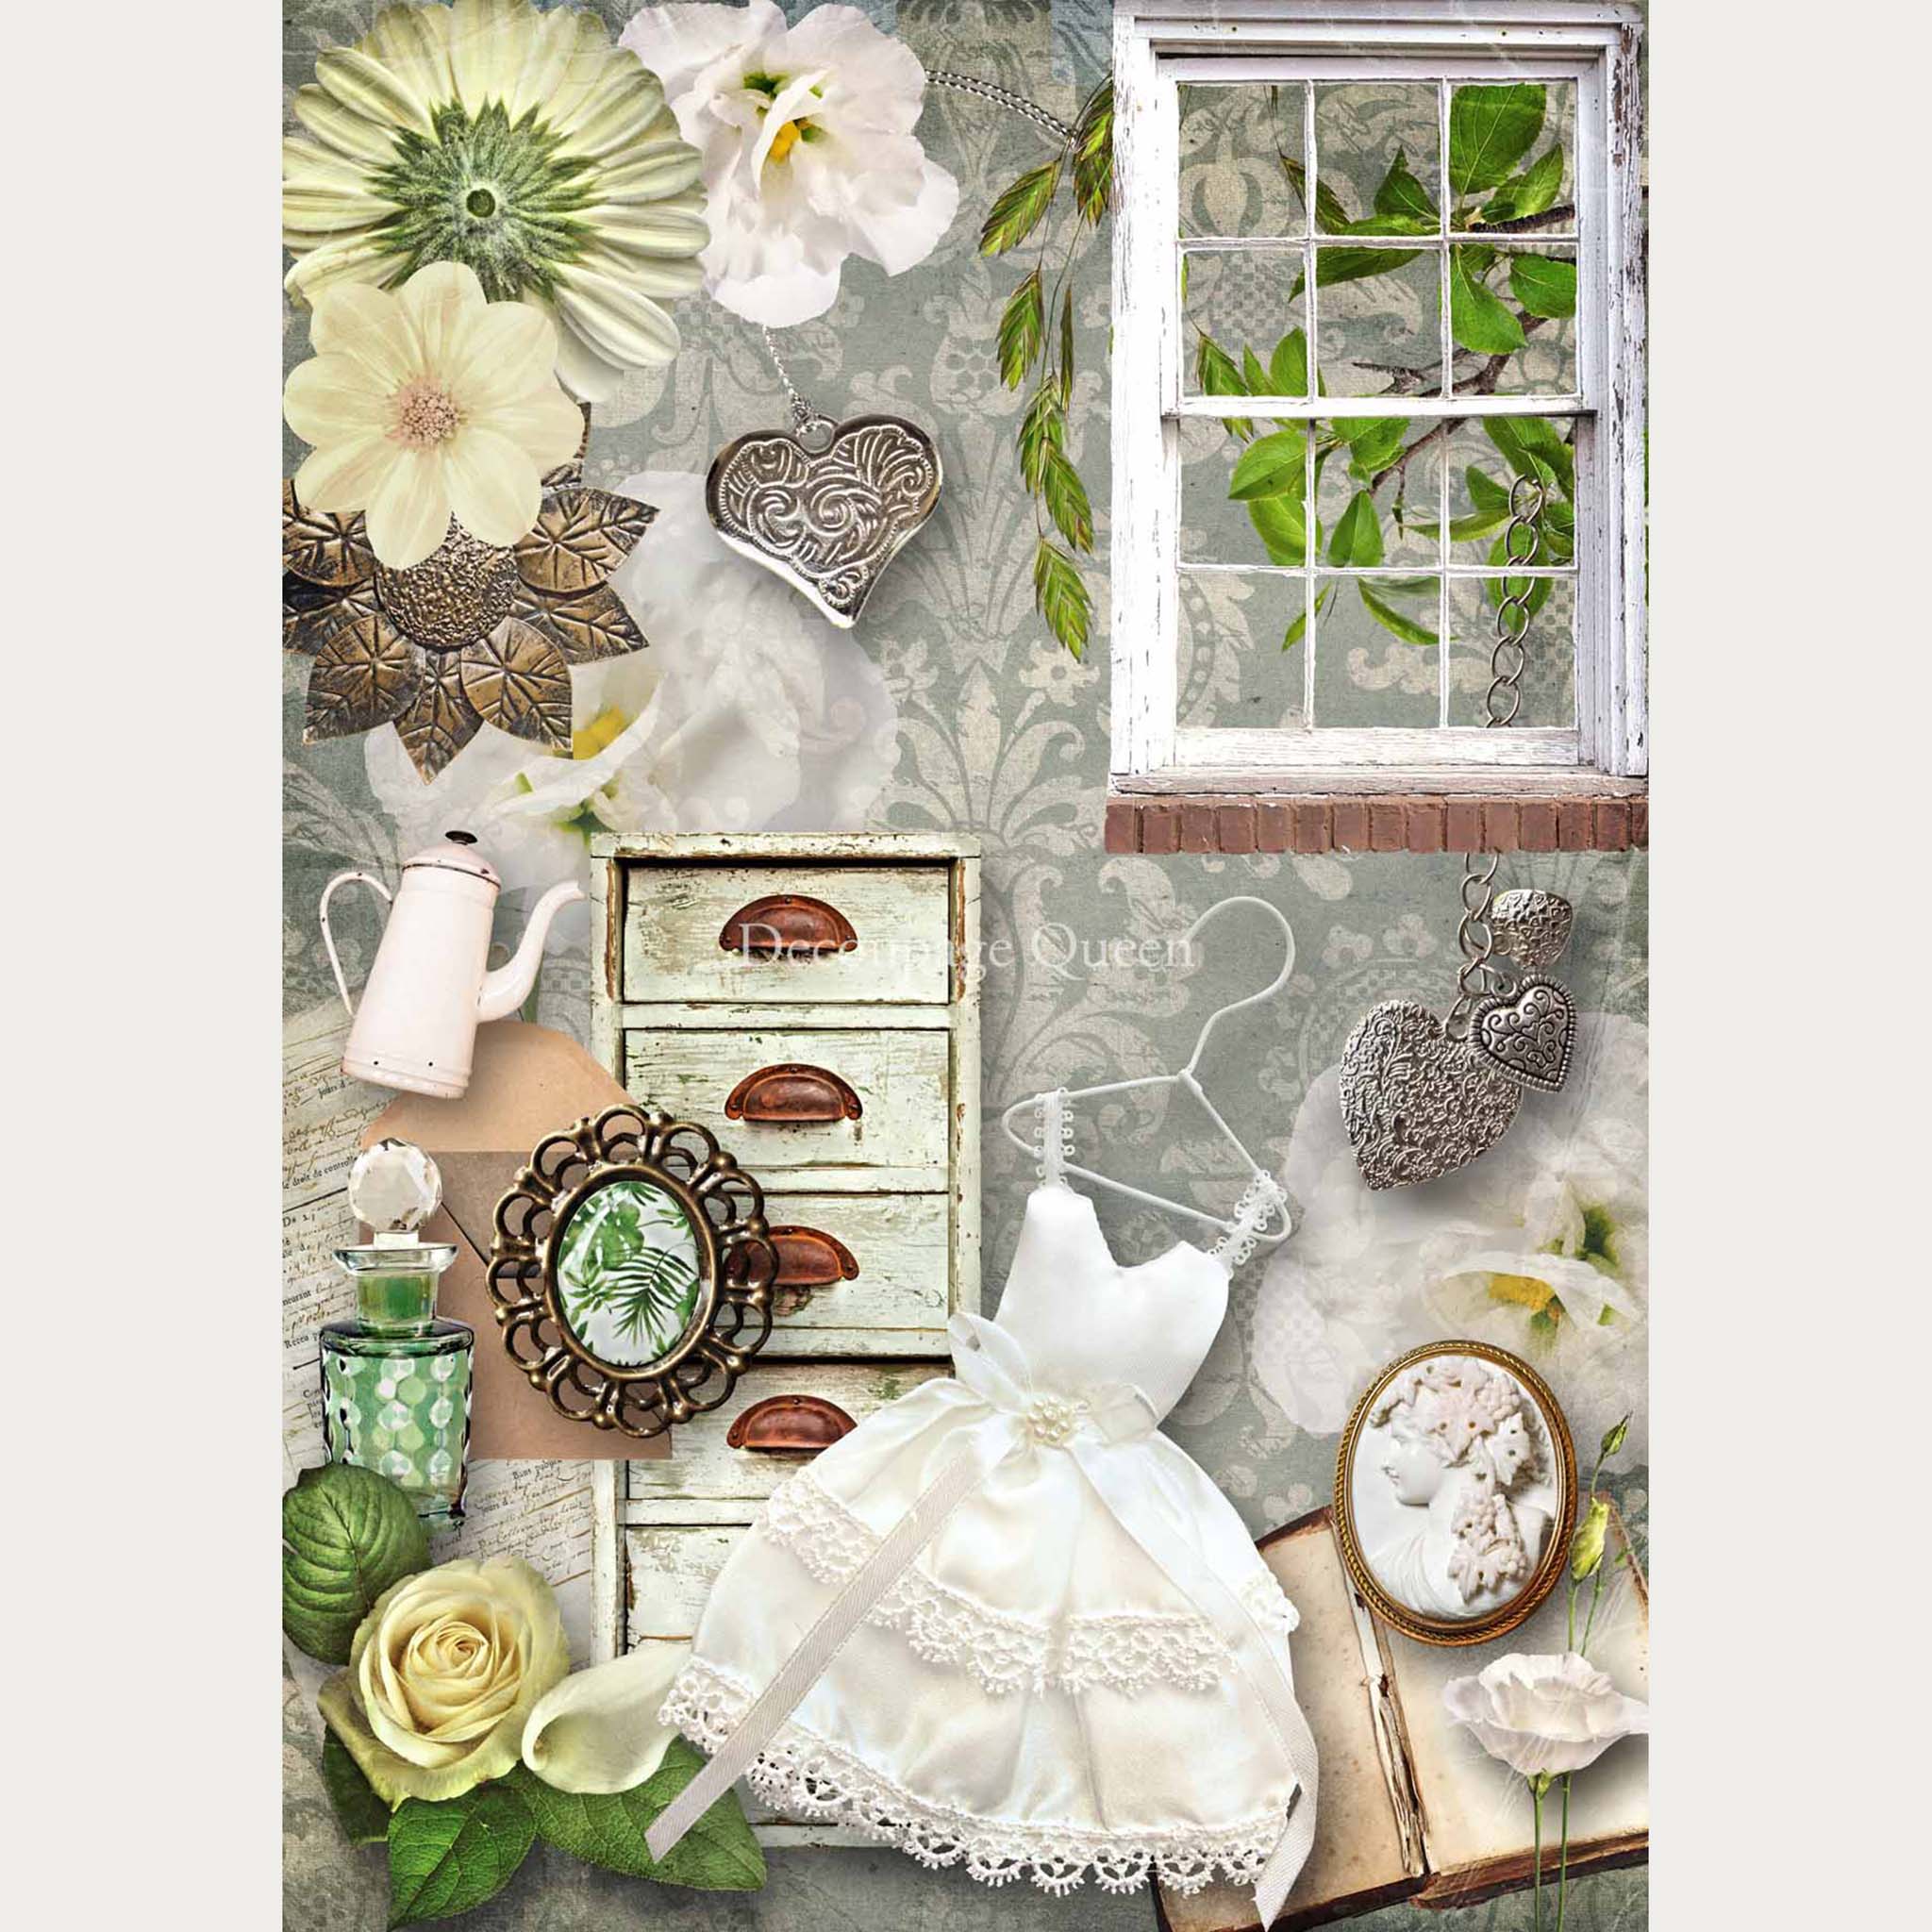 A3 rice paper design that features a collage of silver heart necklaces, a girls white dress on a hanger, a perfume bottle, a distressed vintage chest dresser, a white 12 pane vintage window, and white flowers against a damask wallpaper. White borders are on the sides.